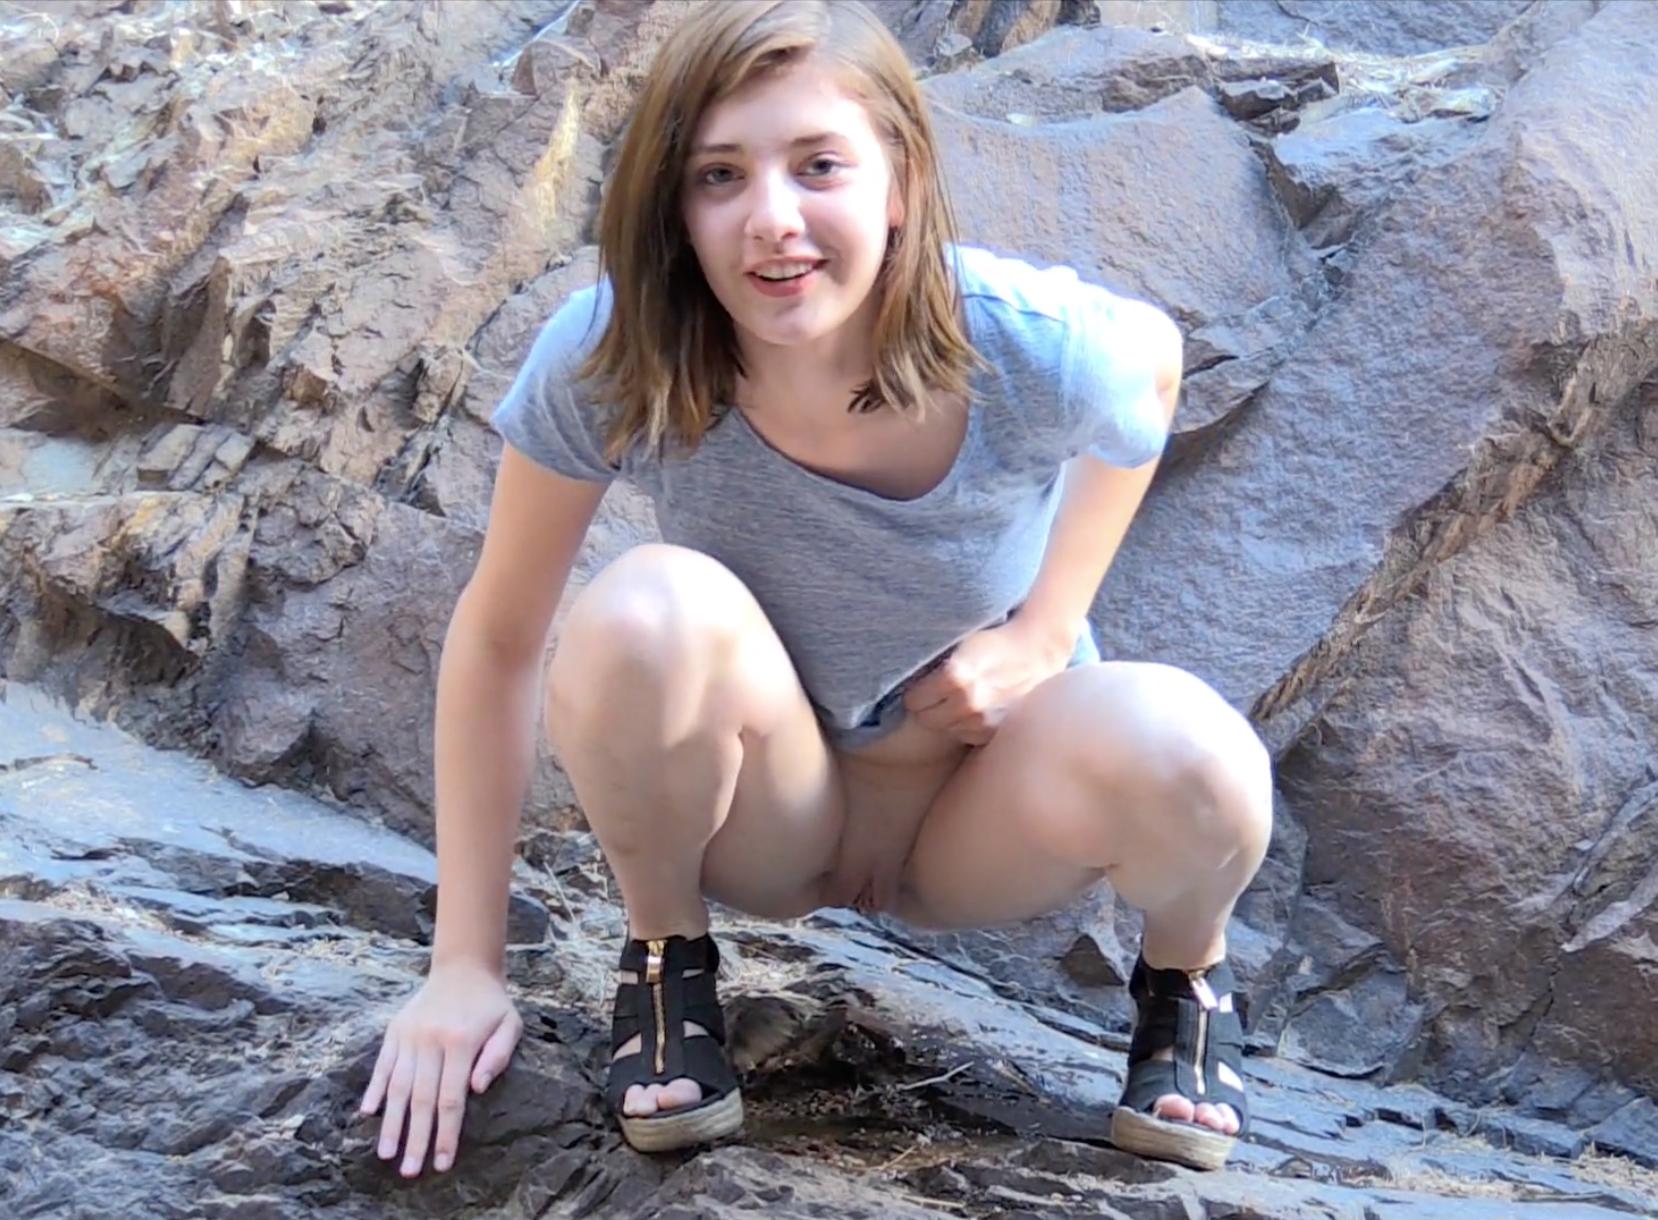 Teen Pissing Outdoors - Outdoor pee: Cute Teen Pees on Rocks - ThisVid.com